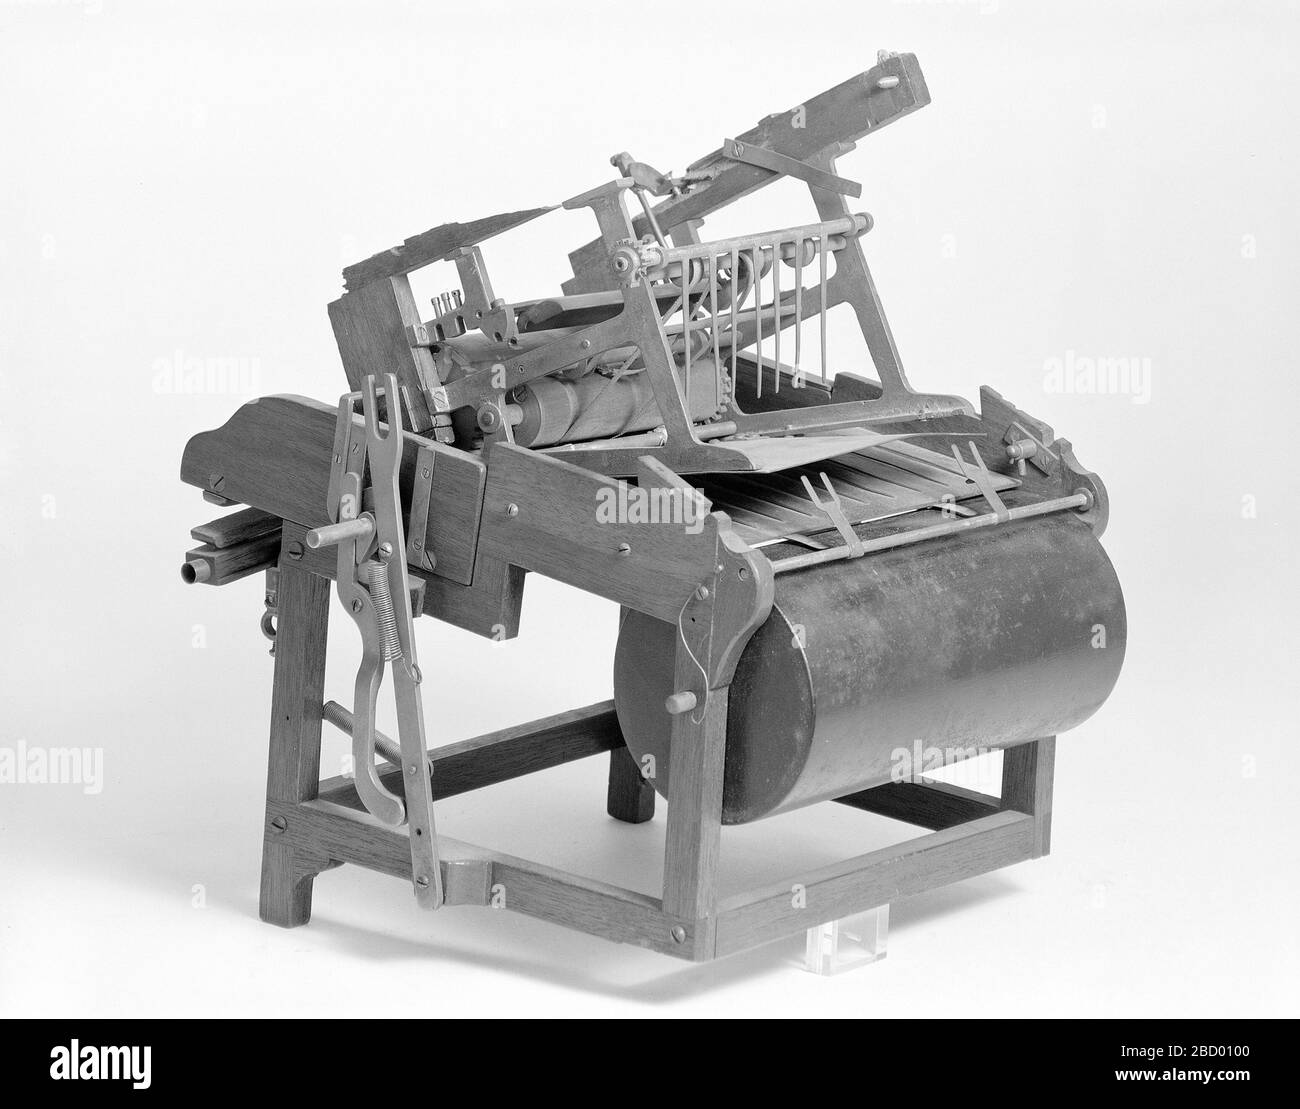 Patent Model of a Sheetfeed Apparatus. This patent model demonstrates an invention for a sheet-feed apparatus which was granted patent number 107851. The patent details a pneumatic feeder for use with presses, calendars and other apparatus. The model is damaged.Currently not on view Patent Model of a Sheetfeed Apparatus Stock Photo